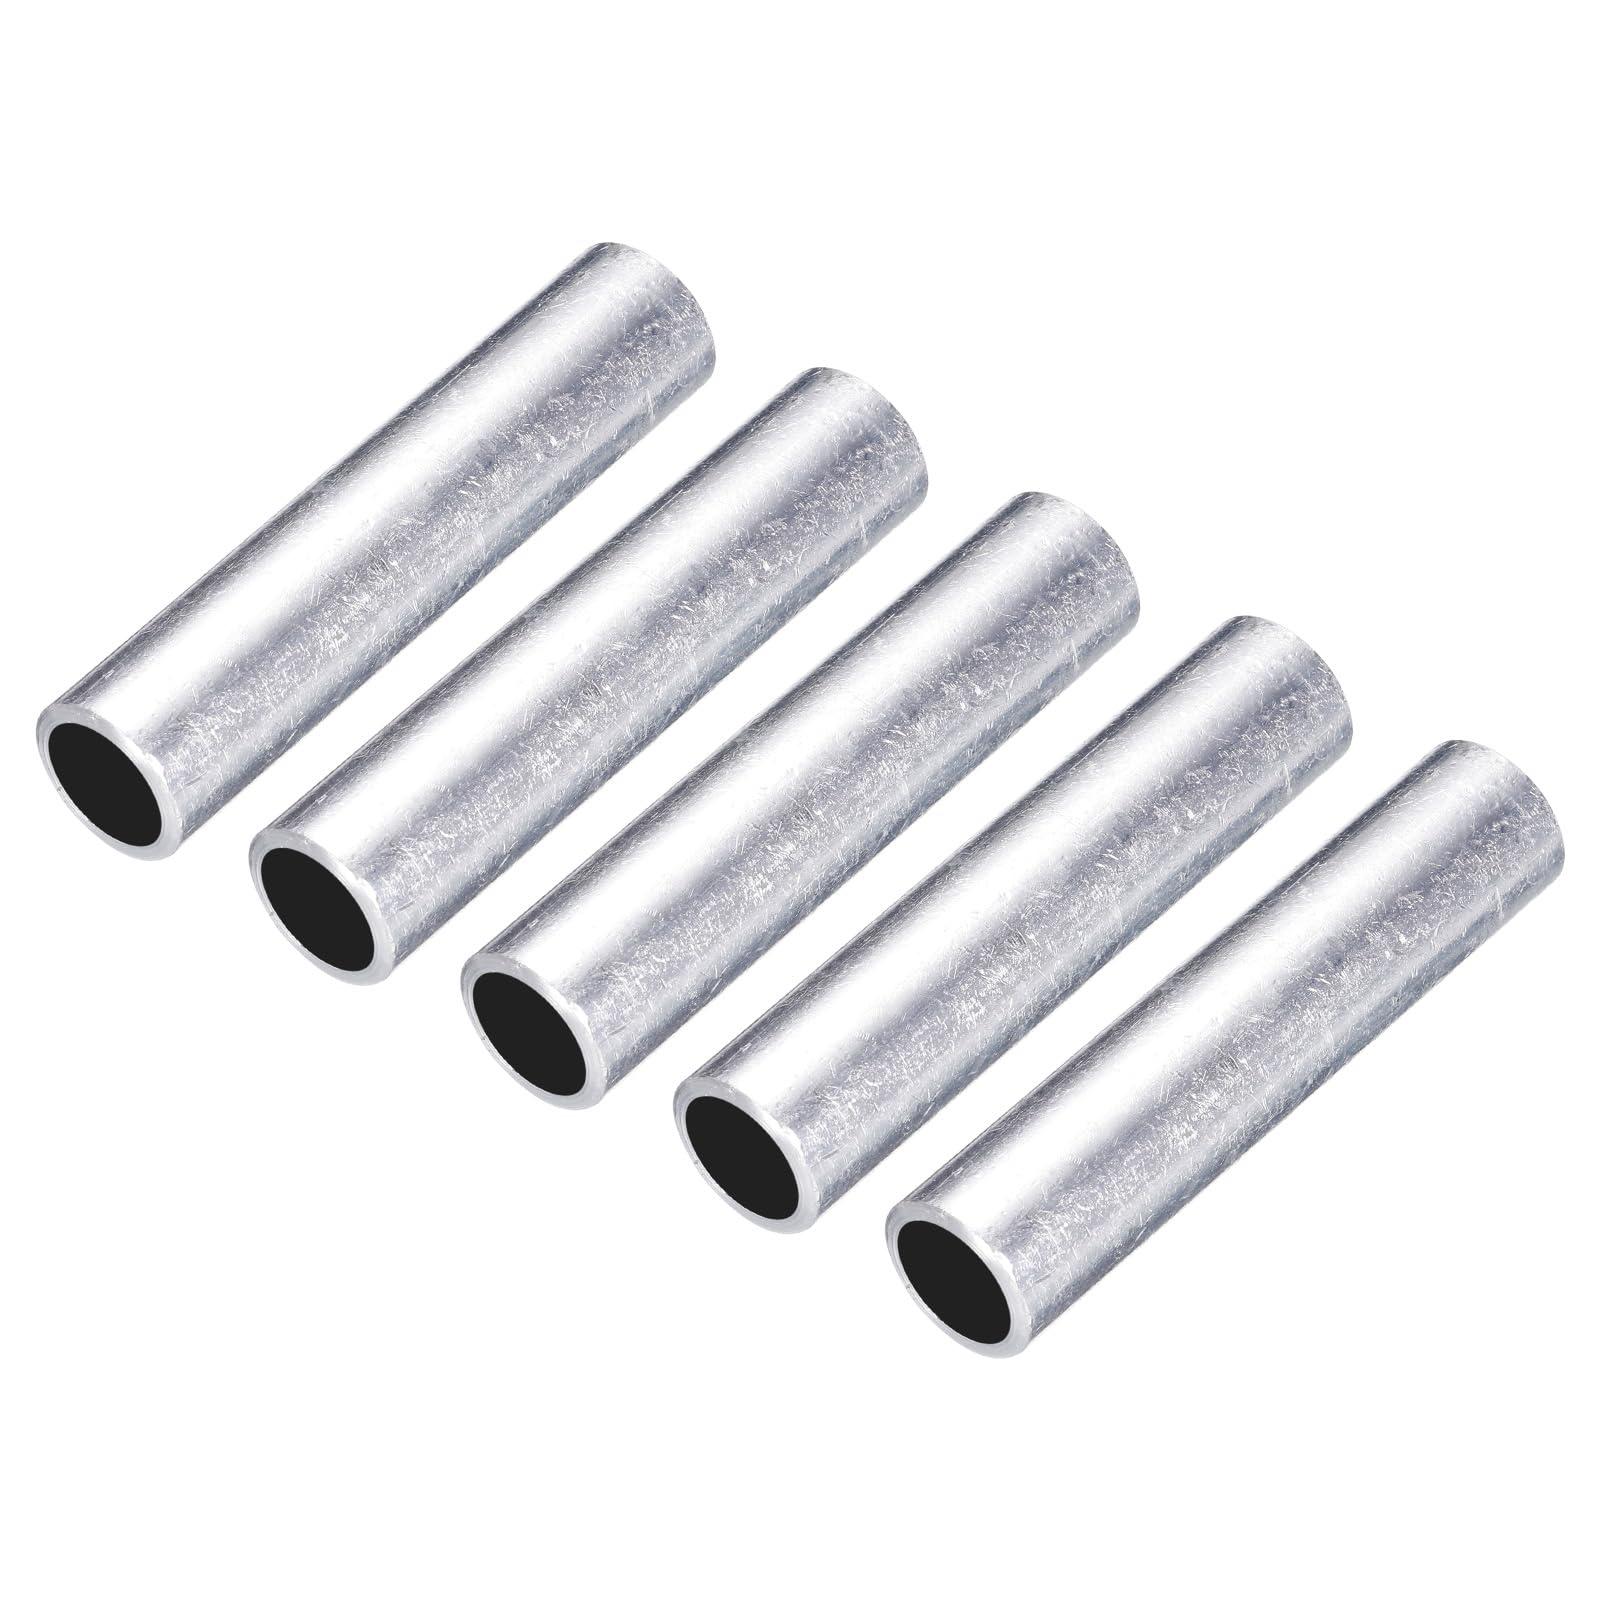 sourcing map 10 Pcs Non Insulated Butt Connectors 15mm Aluminium Wire Connector for Electrical Wire Crimp Ferrule Terminals